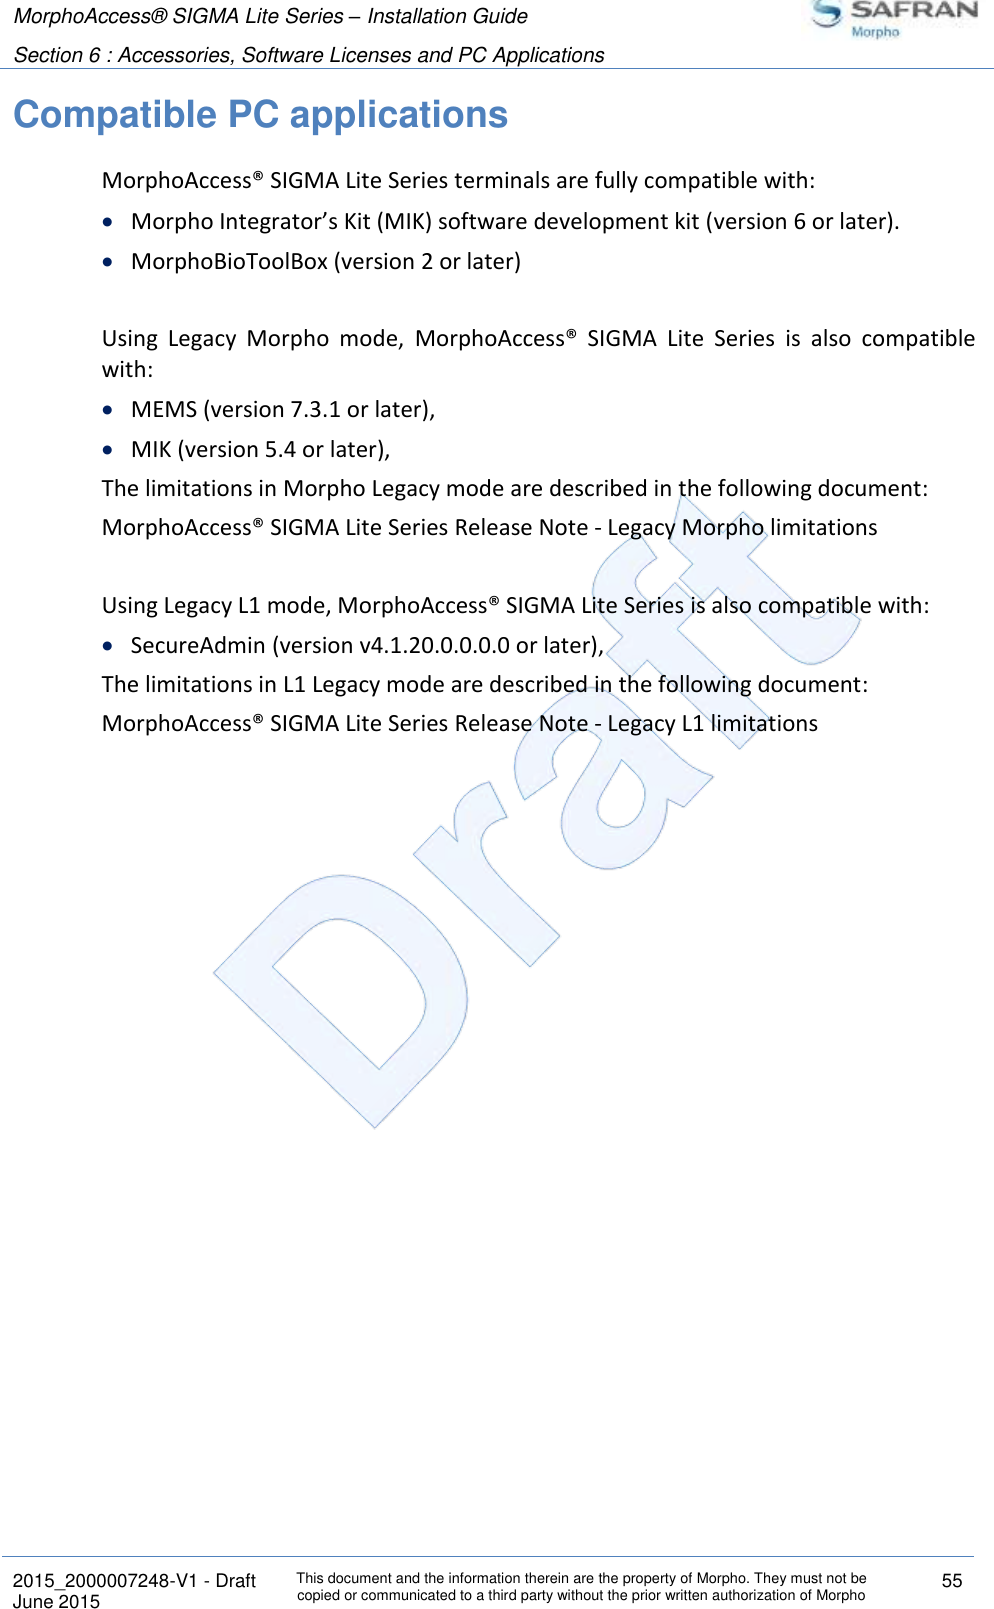 MorphoAccess® SIGMA Lite Series – Installation Guide  Section 6 : Accessories, Software Licenses and PC Applications   2015_2000007248-V1 - Draft This document and the information therein are the property of Morpho. They must not be copied or communicated to a third party without the prior written authorization of Morpho 55 June 2015   Compatible PC applications MorphoAccess® SIGMA Lite Series terminals are fully compatible with:  Morpho Integrator’s Kit (MIK) software development kit (version 6 or later).  MorphoBioToolBox (version 2 or later)  Using  Legacy  Morpho  mode,  MorphoAccess®  SIGMA  Lite  Series  is  also  compatible with:  MEMS (version 7.3.1 or later),  MIK (version 5.4 or later), The limitations in Morpho Legacy mode are described in the following document: MorphoAccess® SIGMA Lite Series Release Note - Legacy Morpho limitations  Using Legacy L1 mode, MorphoAccess® SIGMA Lite Series is also compatible with:  SecureAdmin (version v4.1.20.0.0.0.0 or later), The limitations in L1 Legacy mode are described in the following document: MorphoAccess® SIGMA Lite Series Release Note - Legacy L1 limitations  